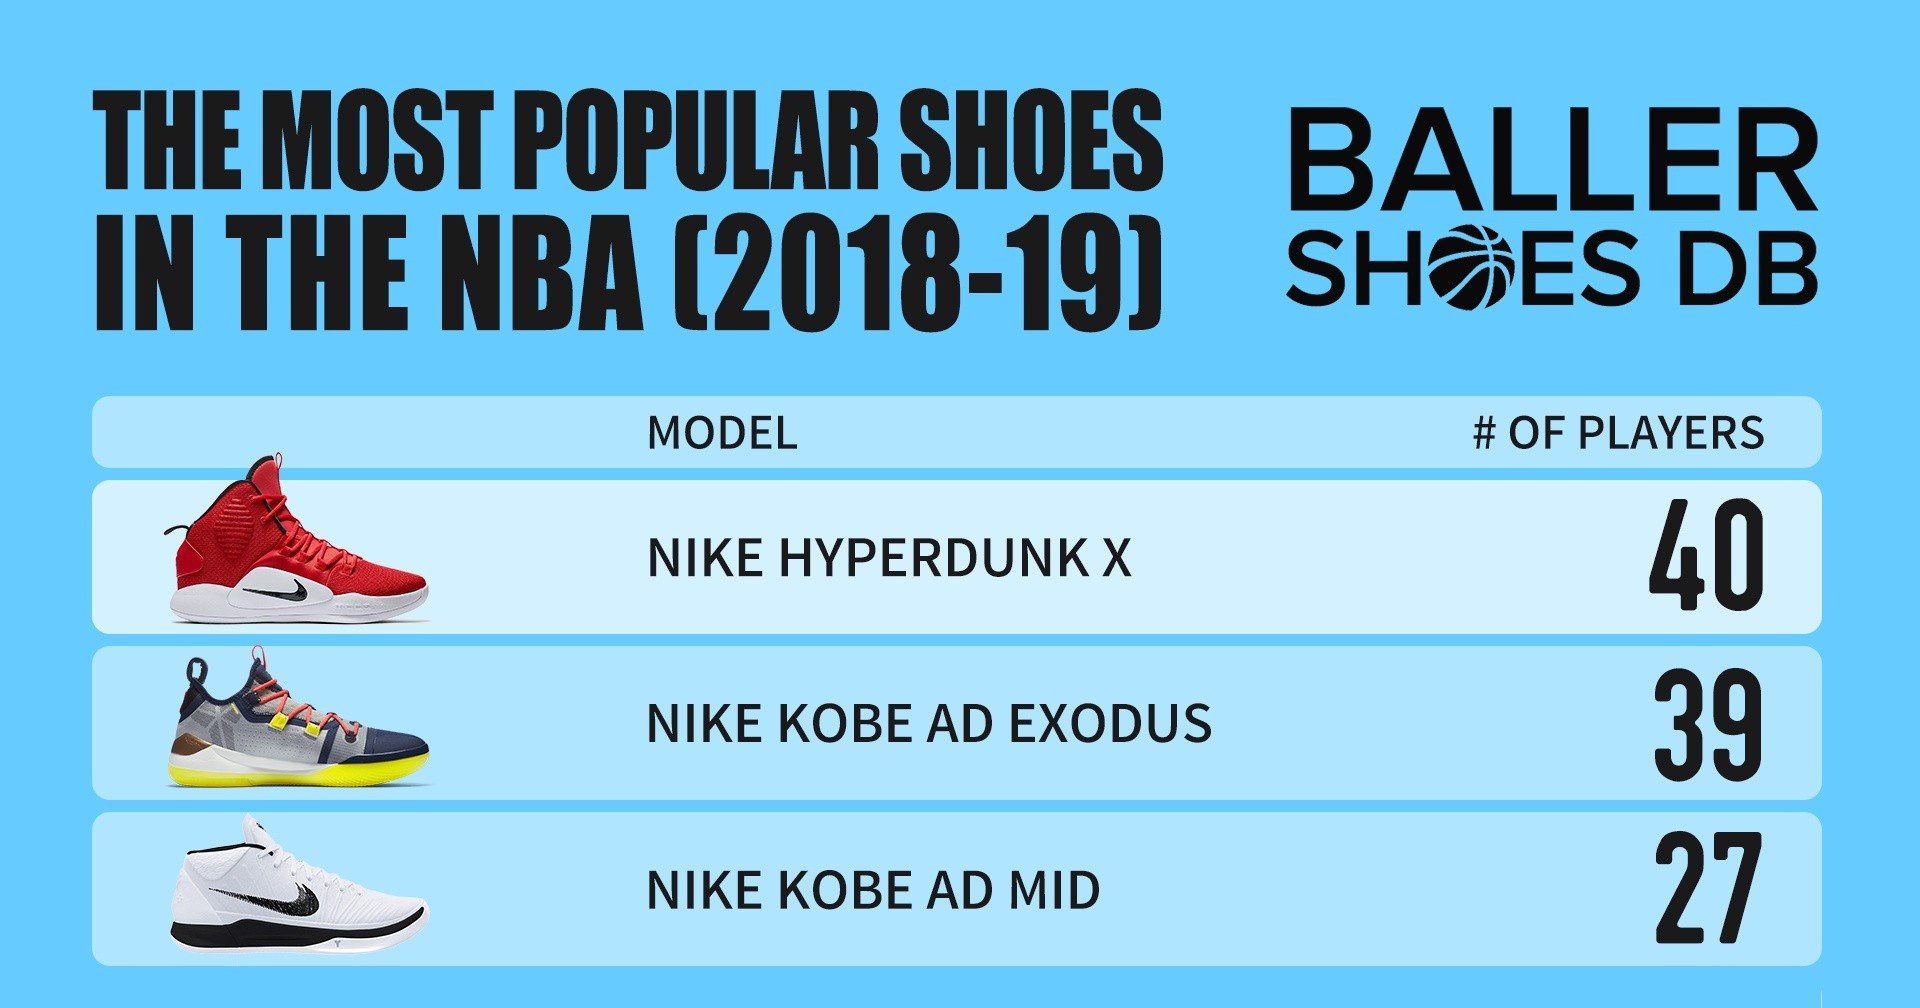 adidas top selling shoes 2018